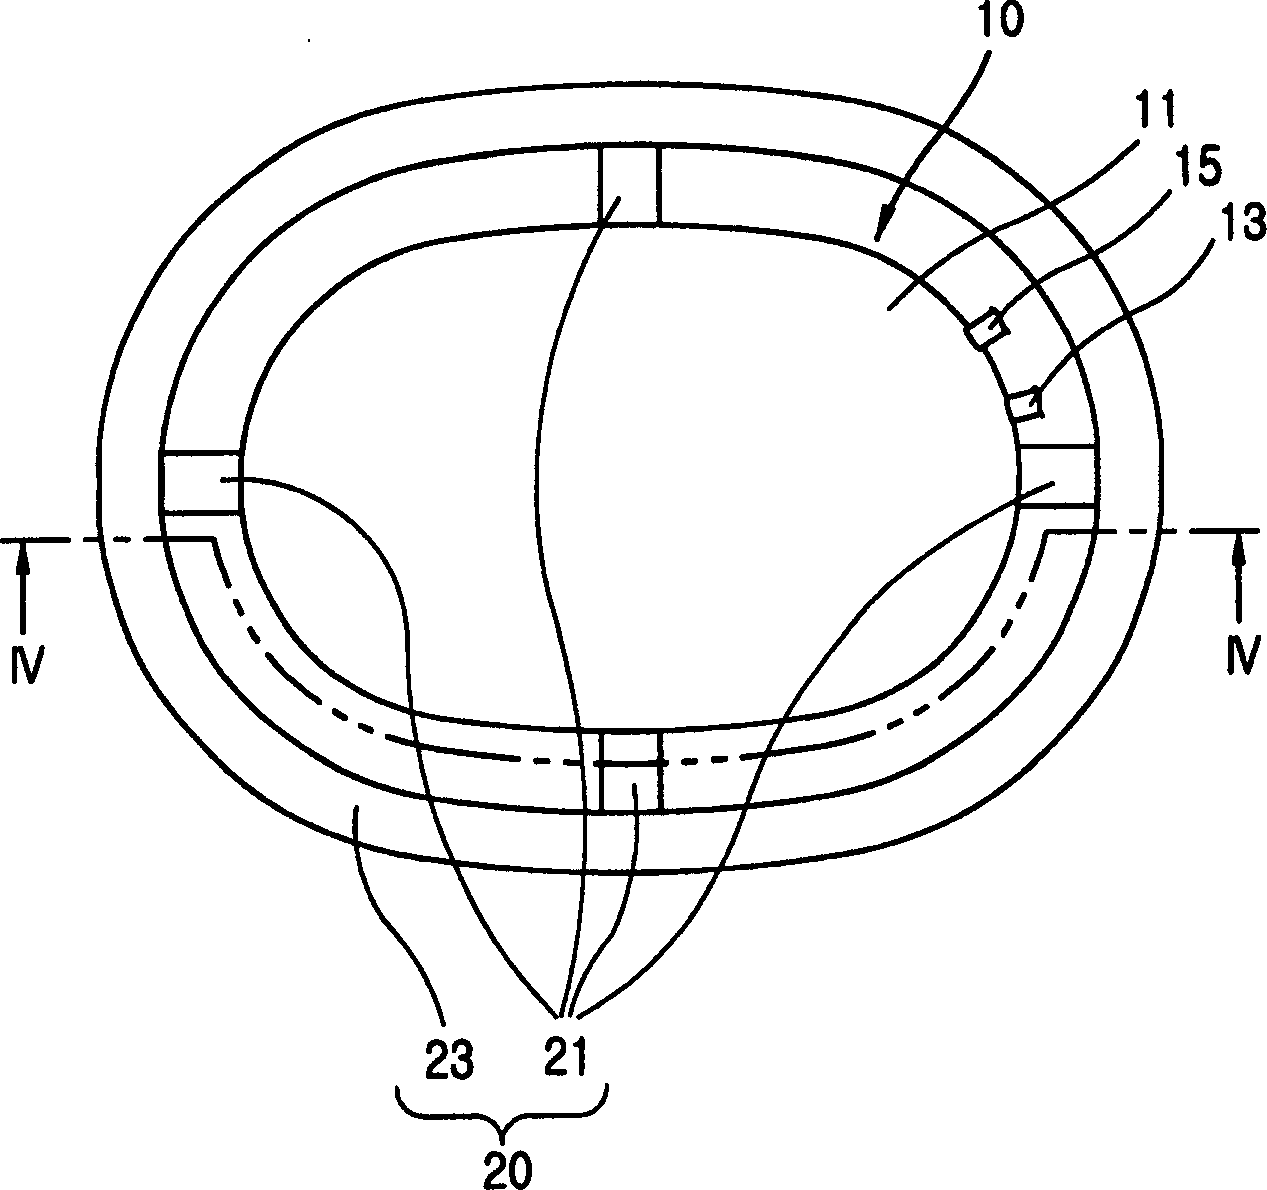 Apparatus for absorbing vibration of compressor